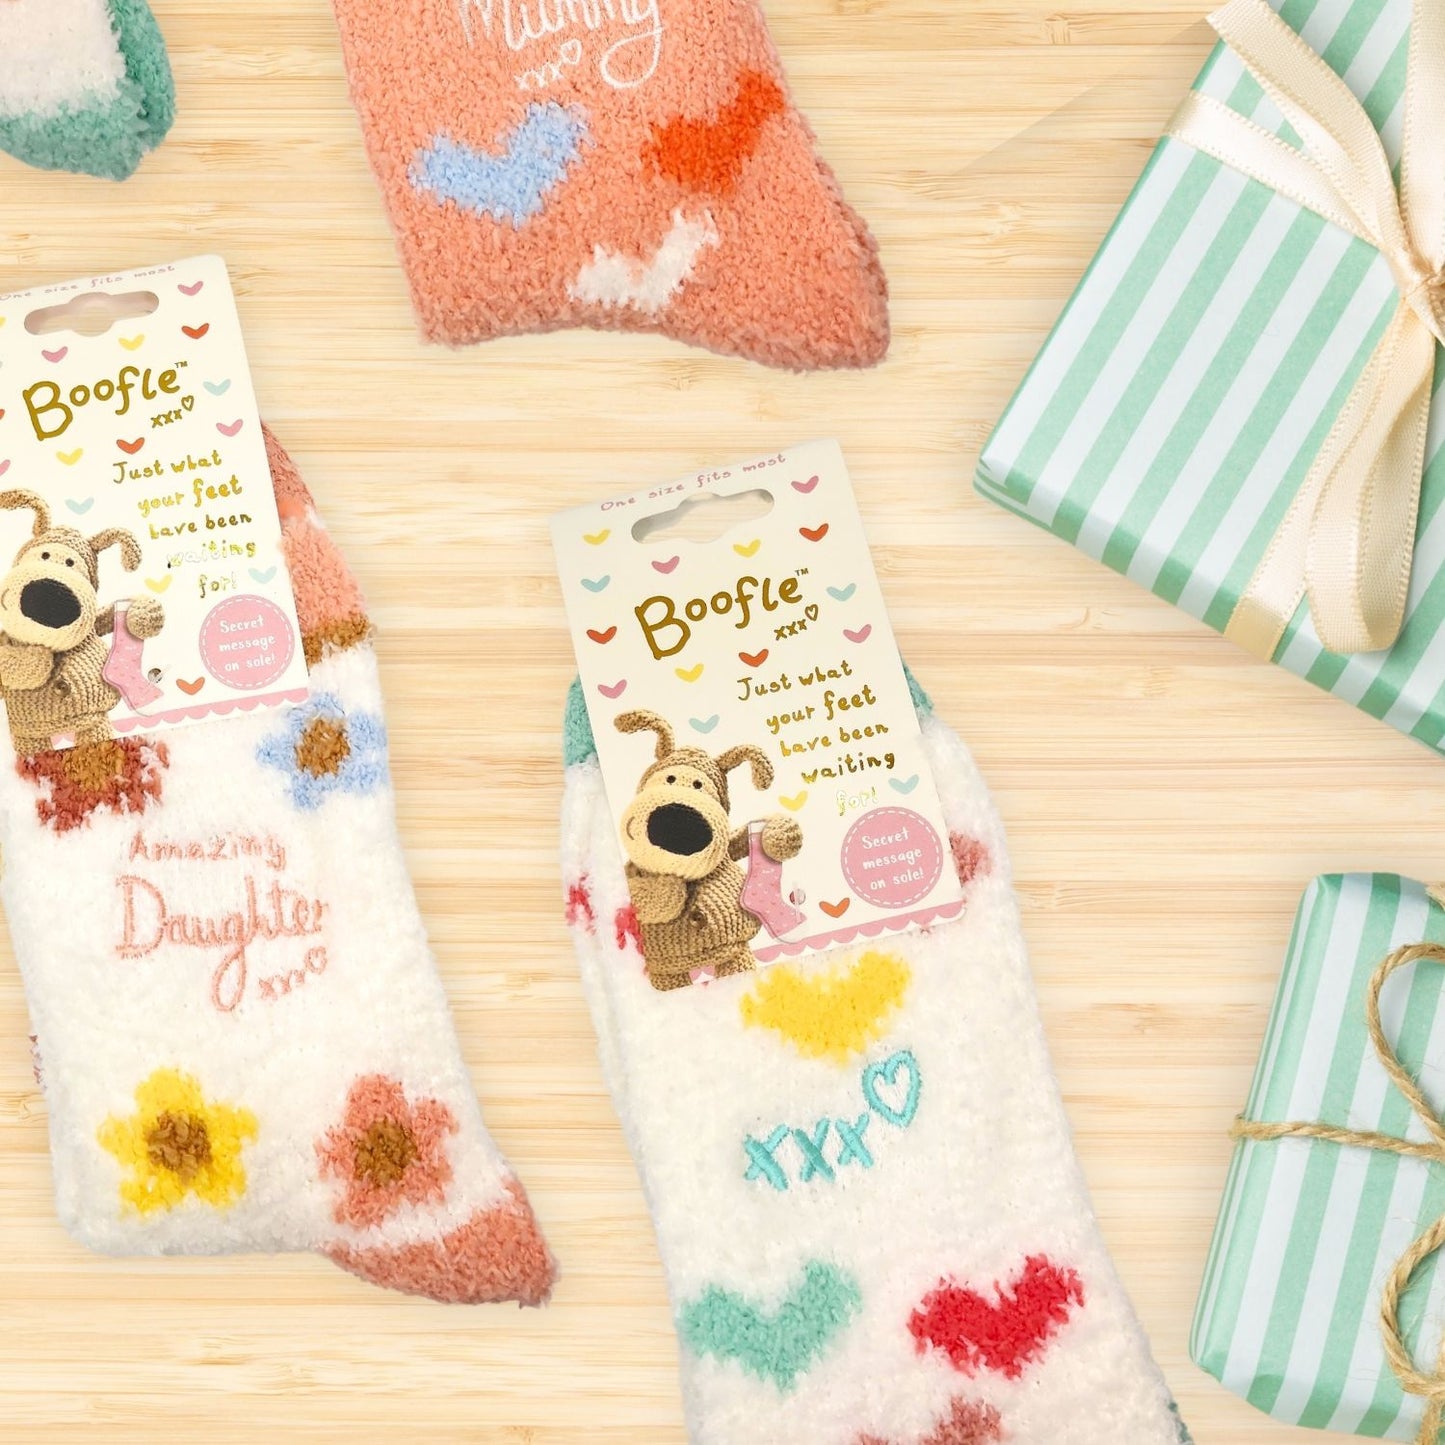 Boofle Extra Special Love Is In Air Socks Gift Idea